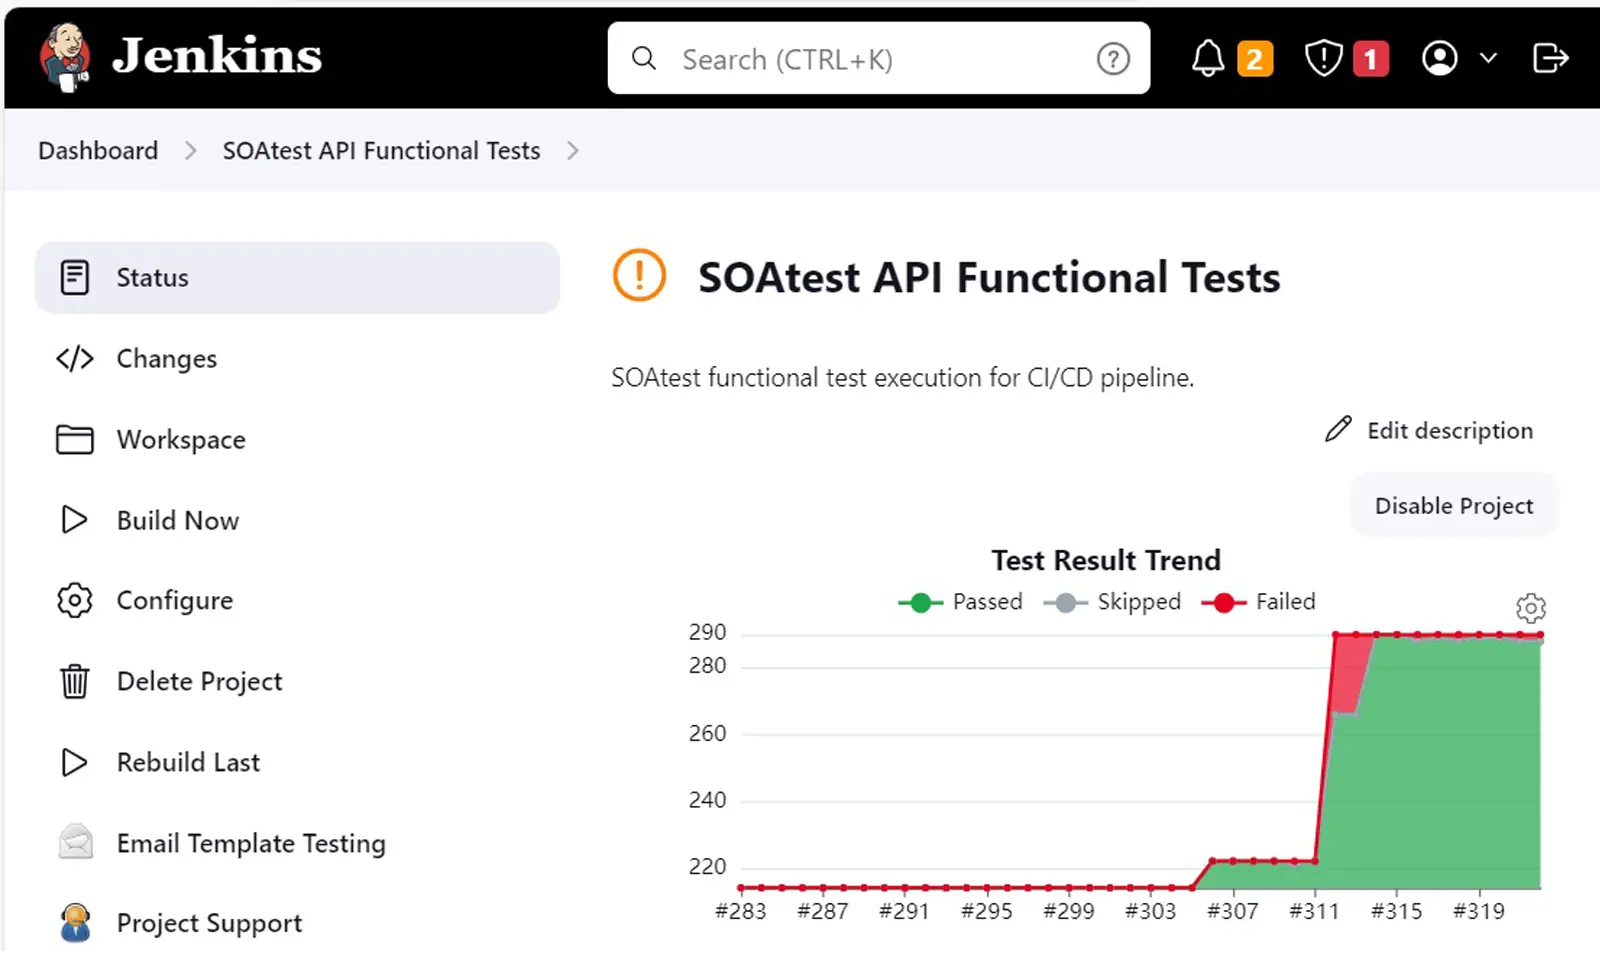 Screenshot of Jenkins UI showing results from a SOAtest API functional test execution.